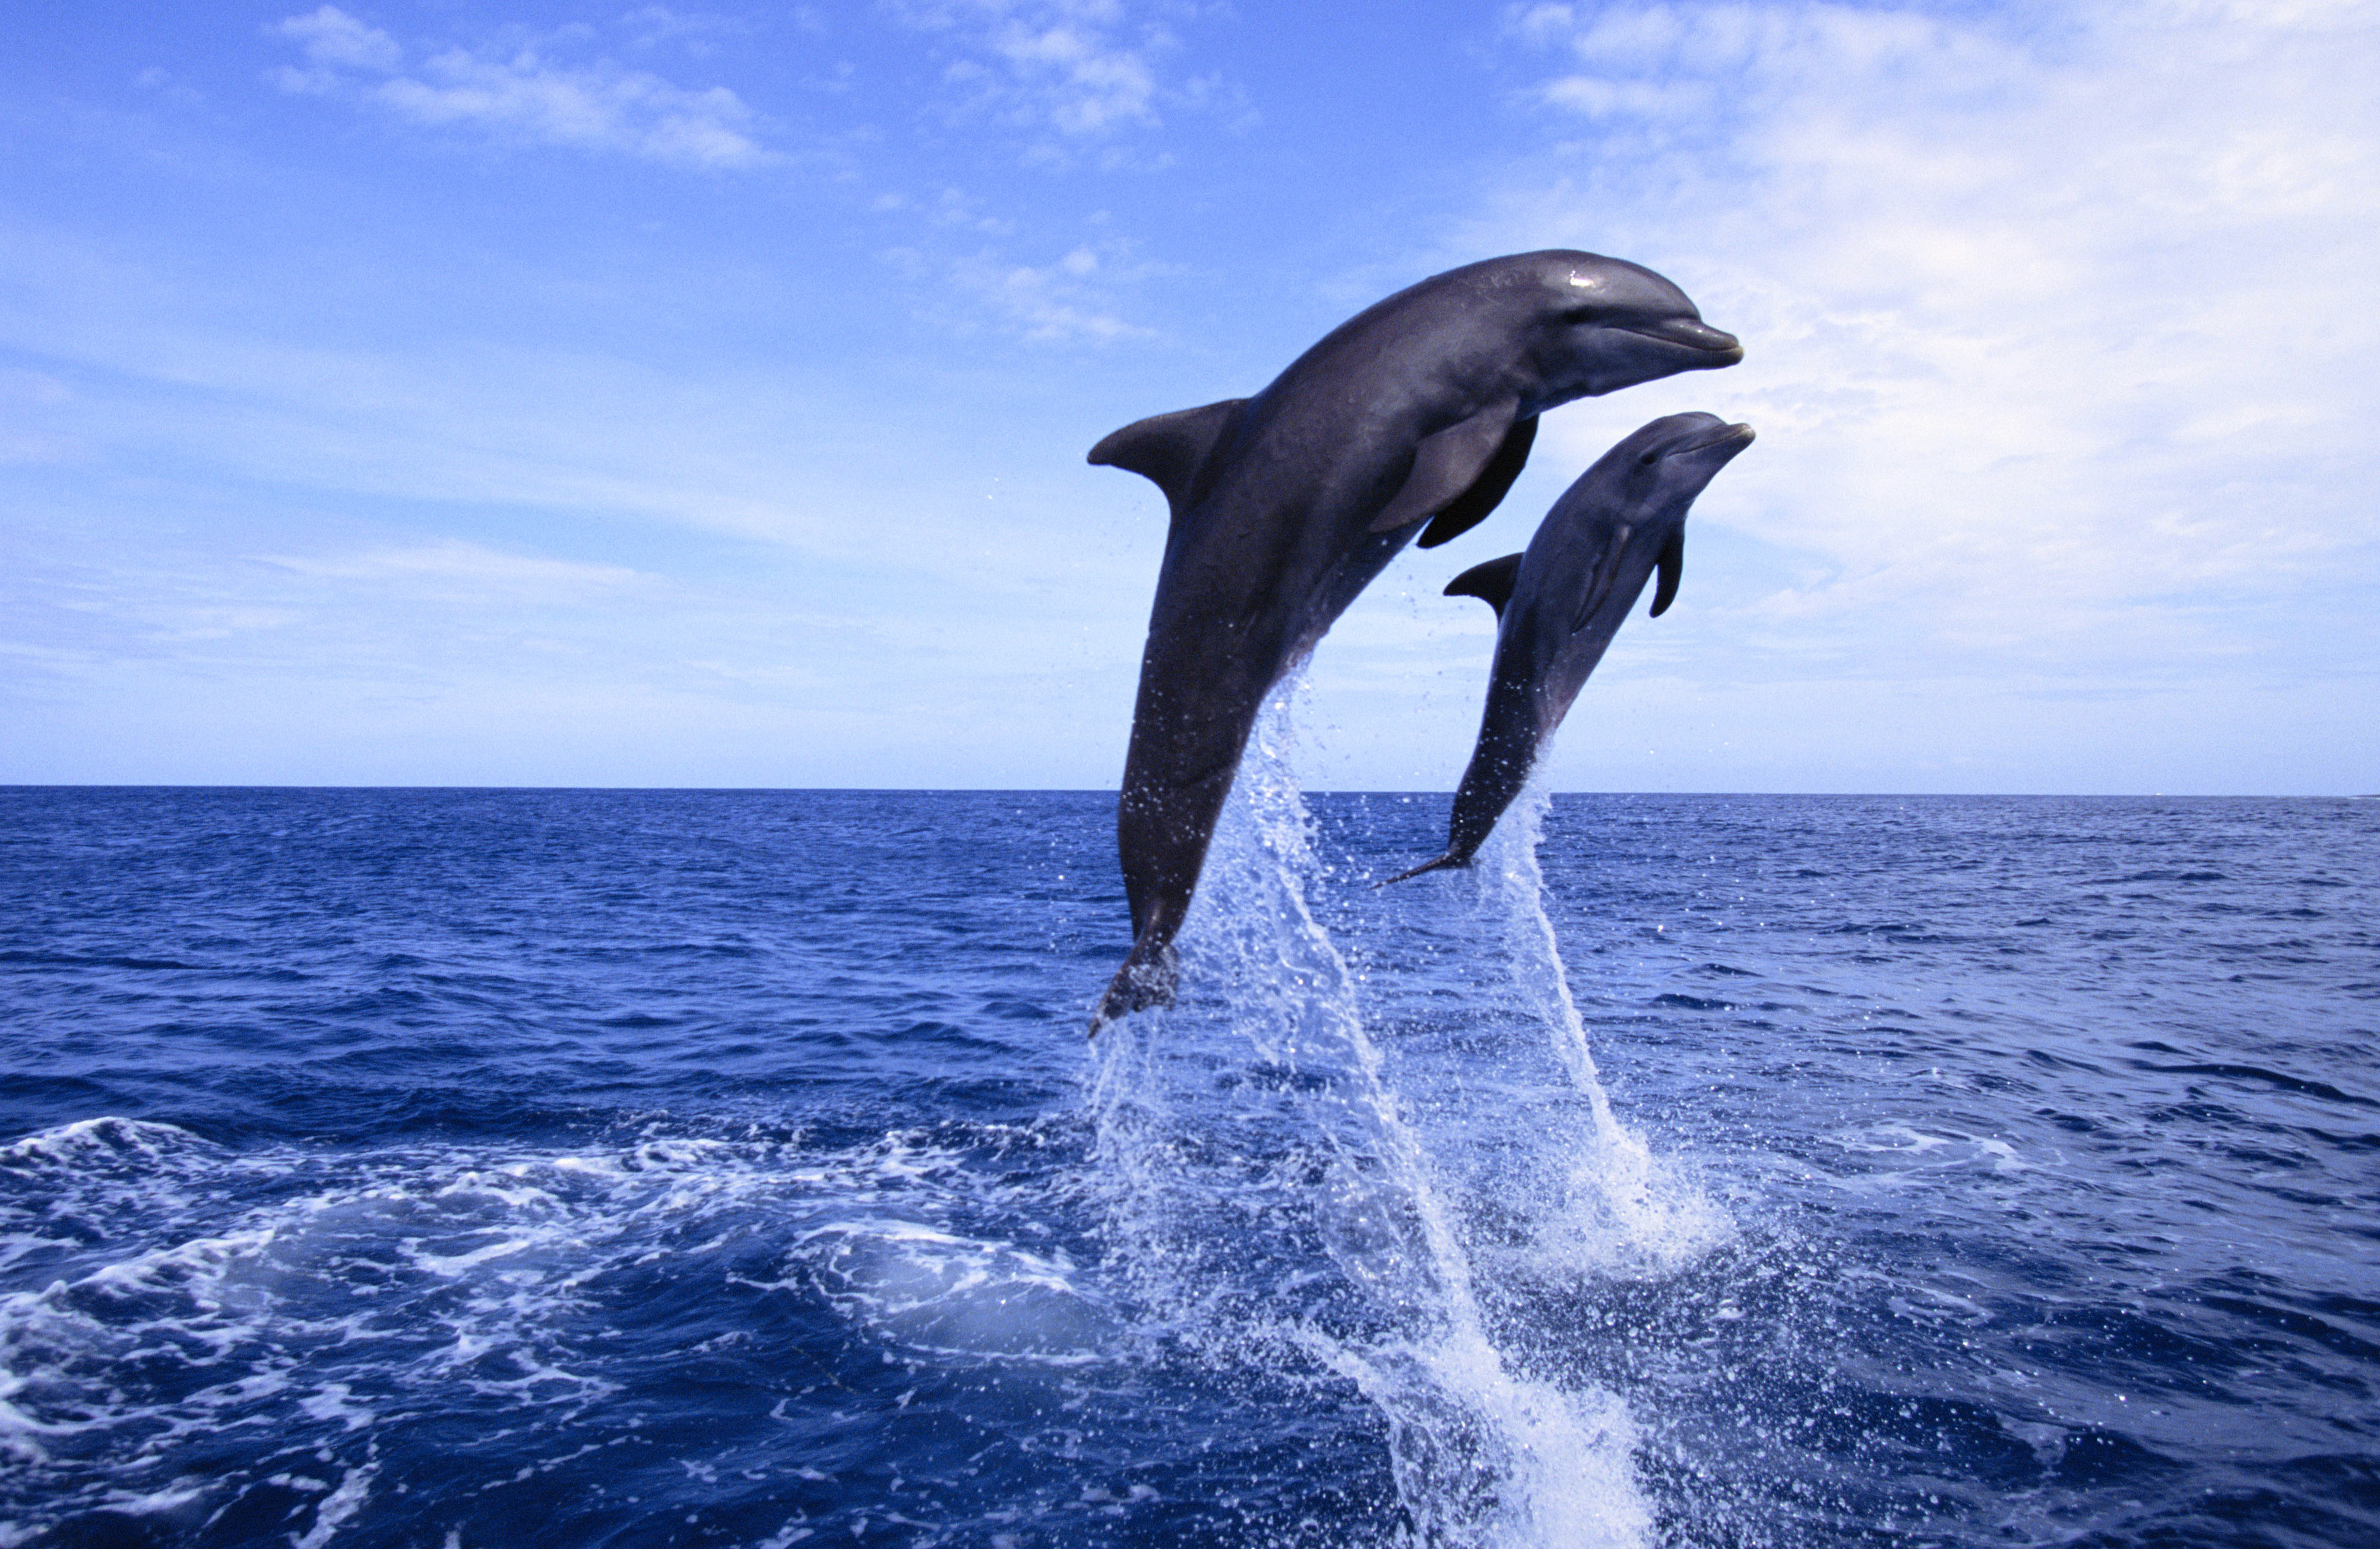 Dolphins jumping in the ocean